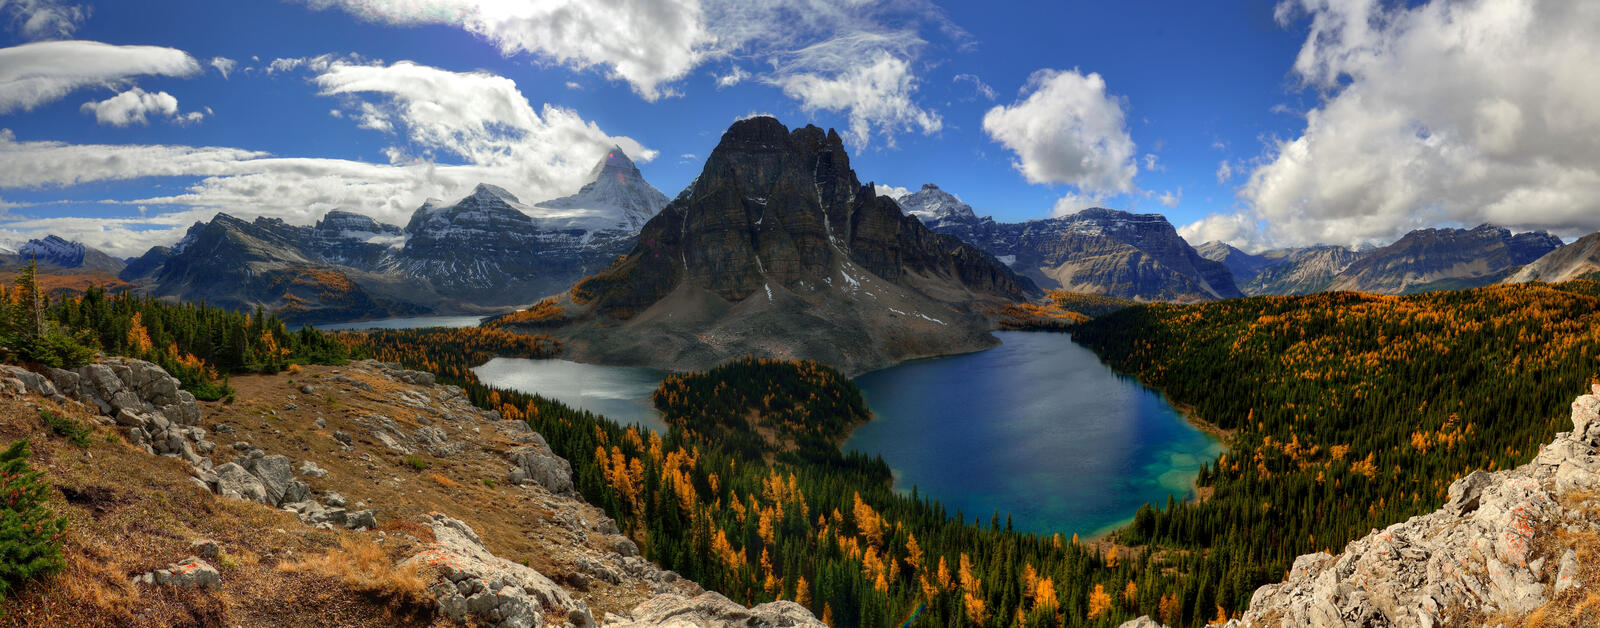 Wallpapers Assiniboine Park panorama Rocky Mountains on the desktop